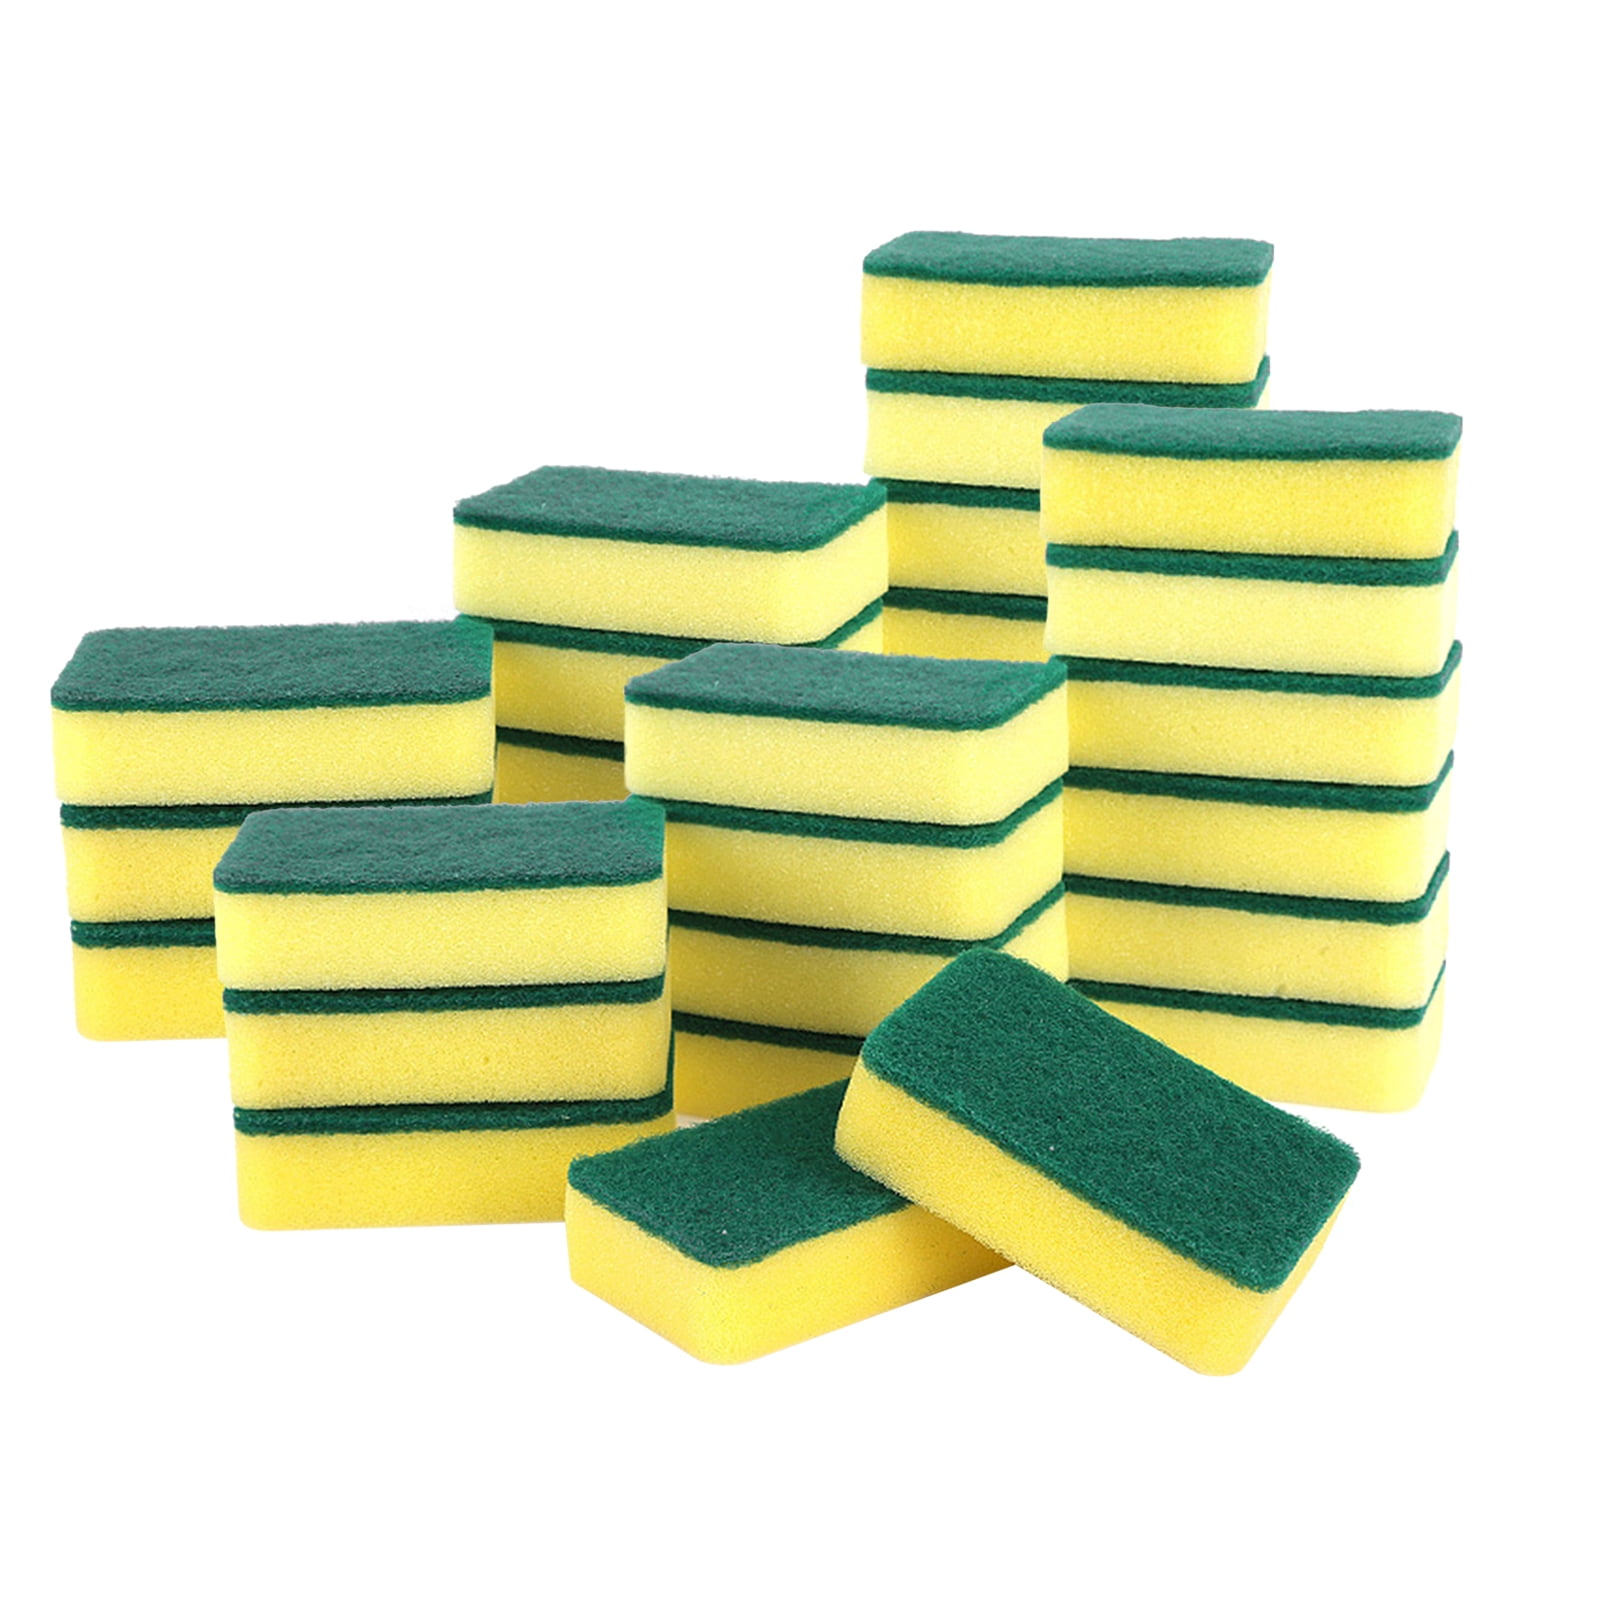 Kitchen Dishwashing Sponge, Individually Wrapped Sponge, Heavy Duty Non  Scratch Scouring Pad, Microfiber Cleaning Sponge Wipes Scrub Pads for  Cleaning Dishes Hard Surface Tools - 3 Color (15 Pack) 